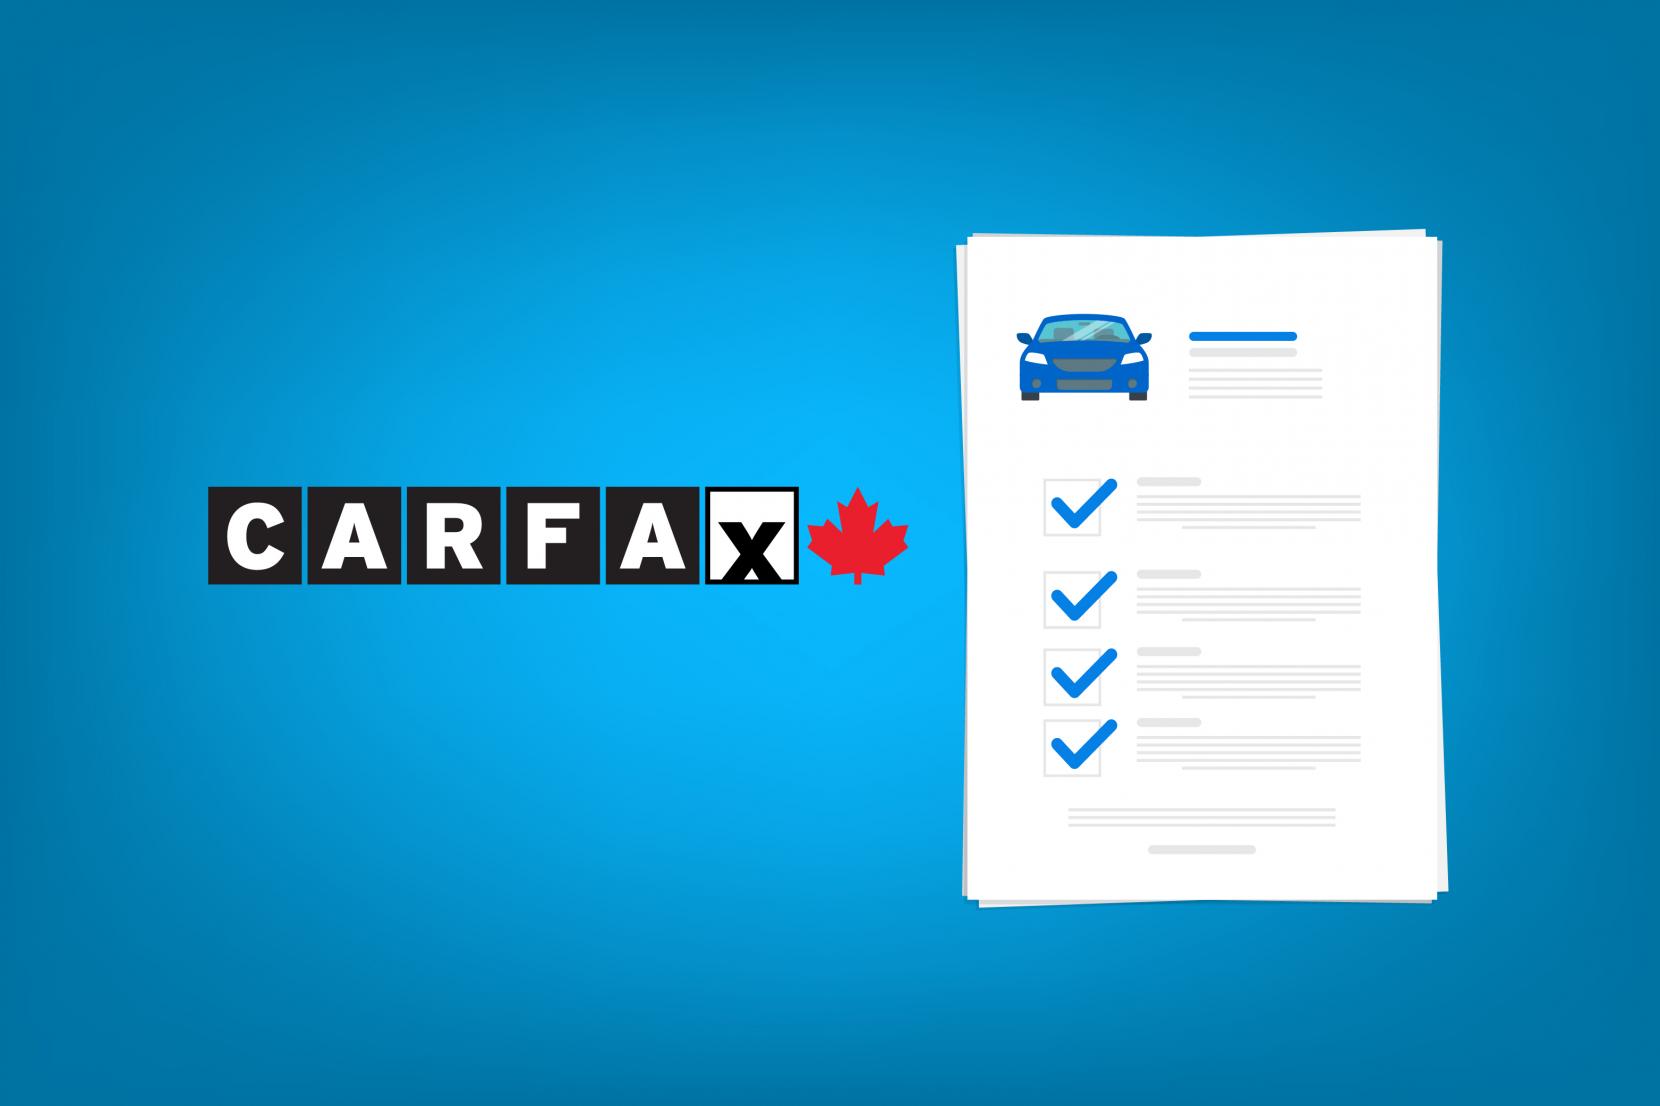 How to get a Carfax Vehicle History Report